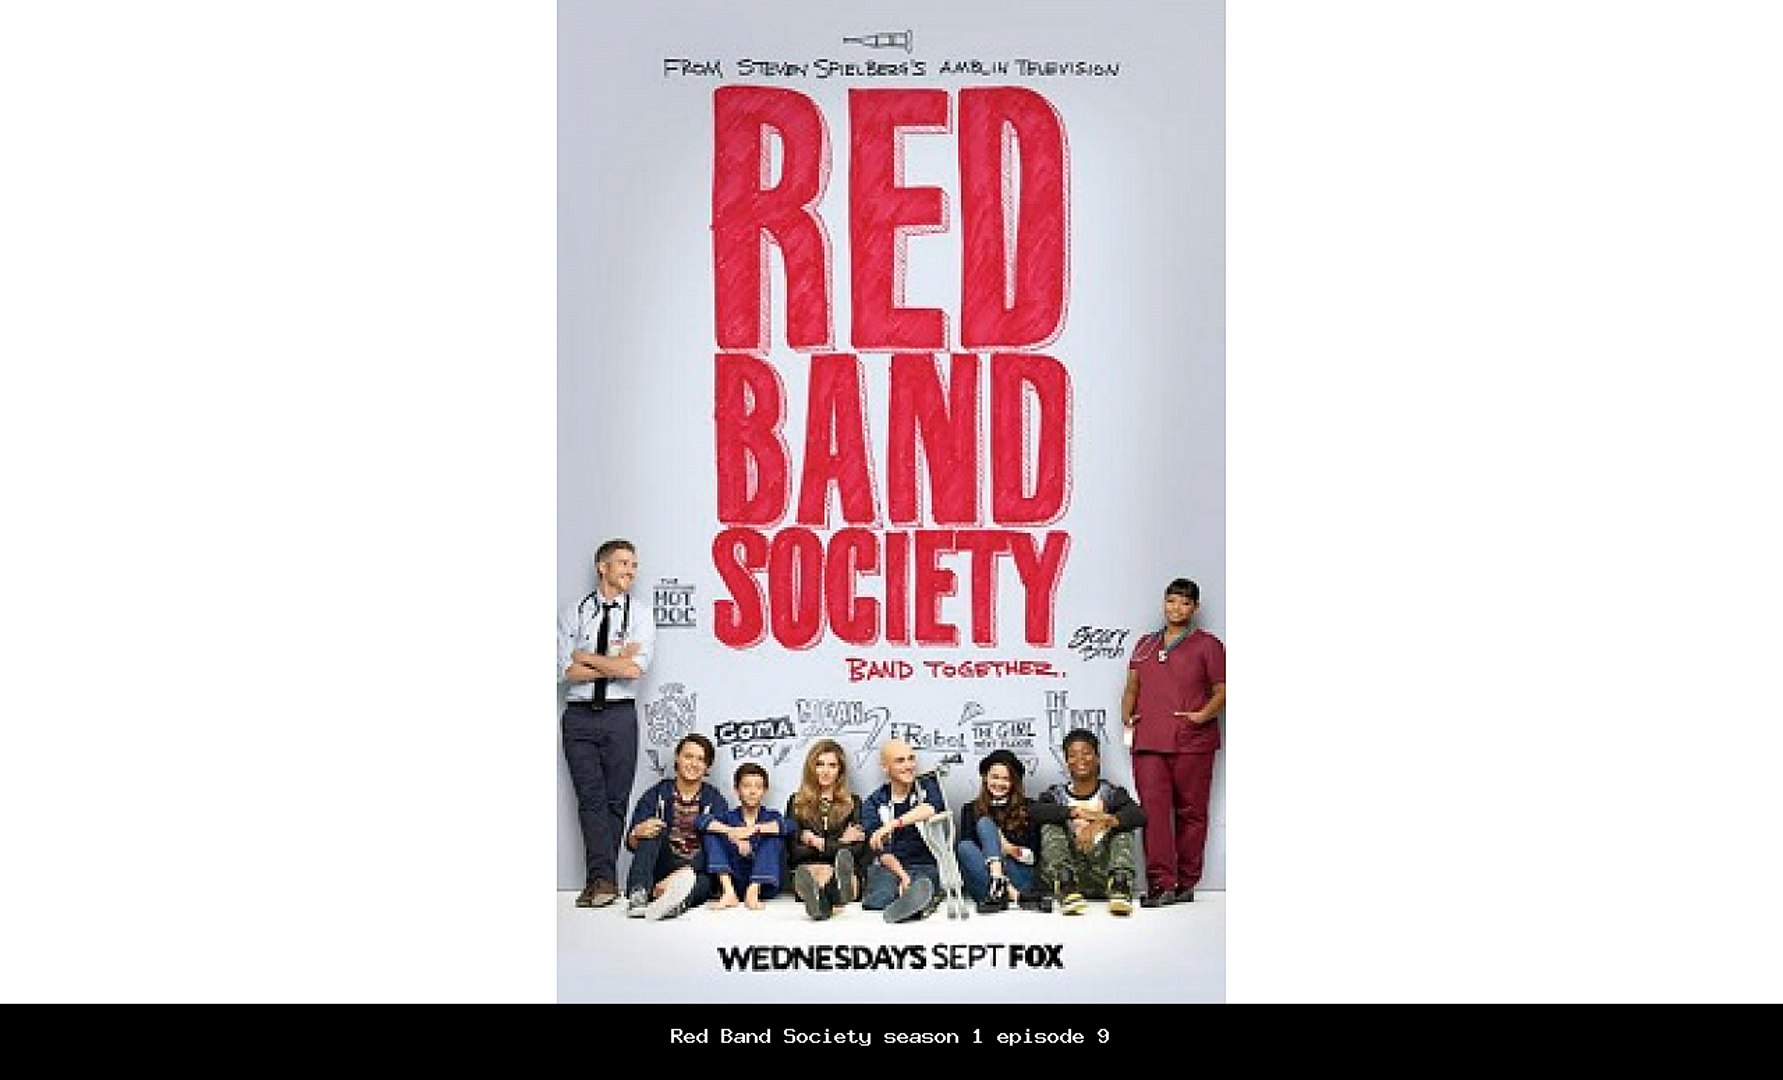 Red Band Society season 1 episode 9 s1e9 - Dailymotion Video